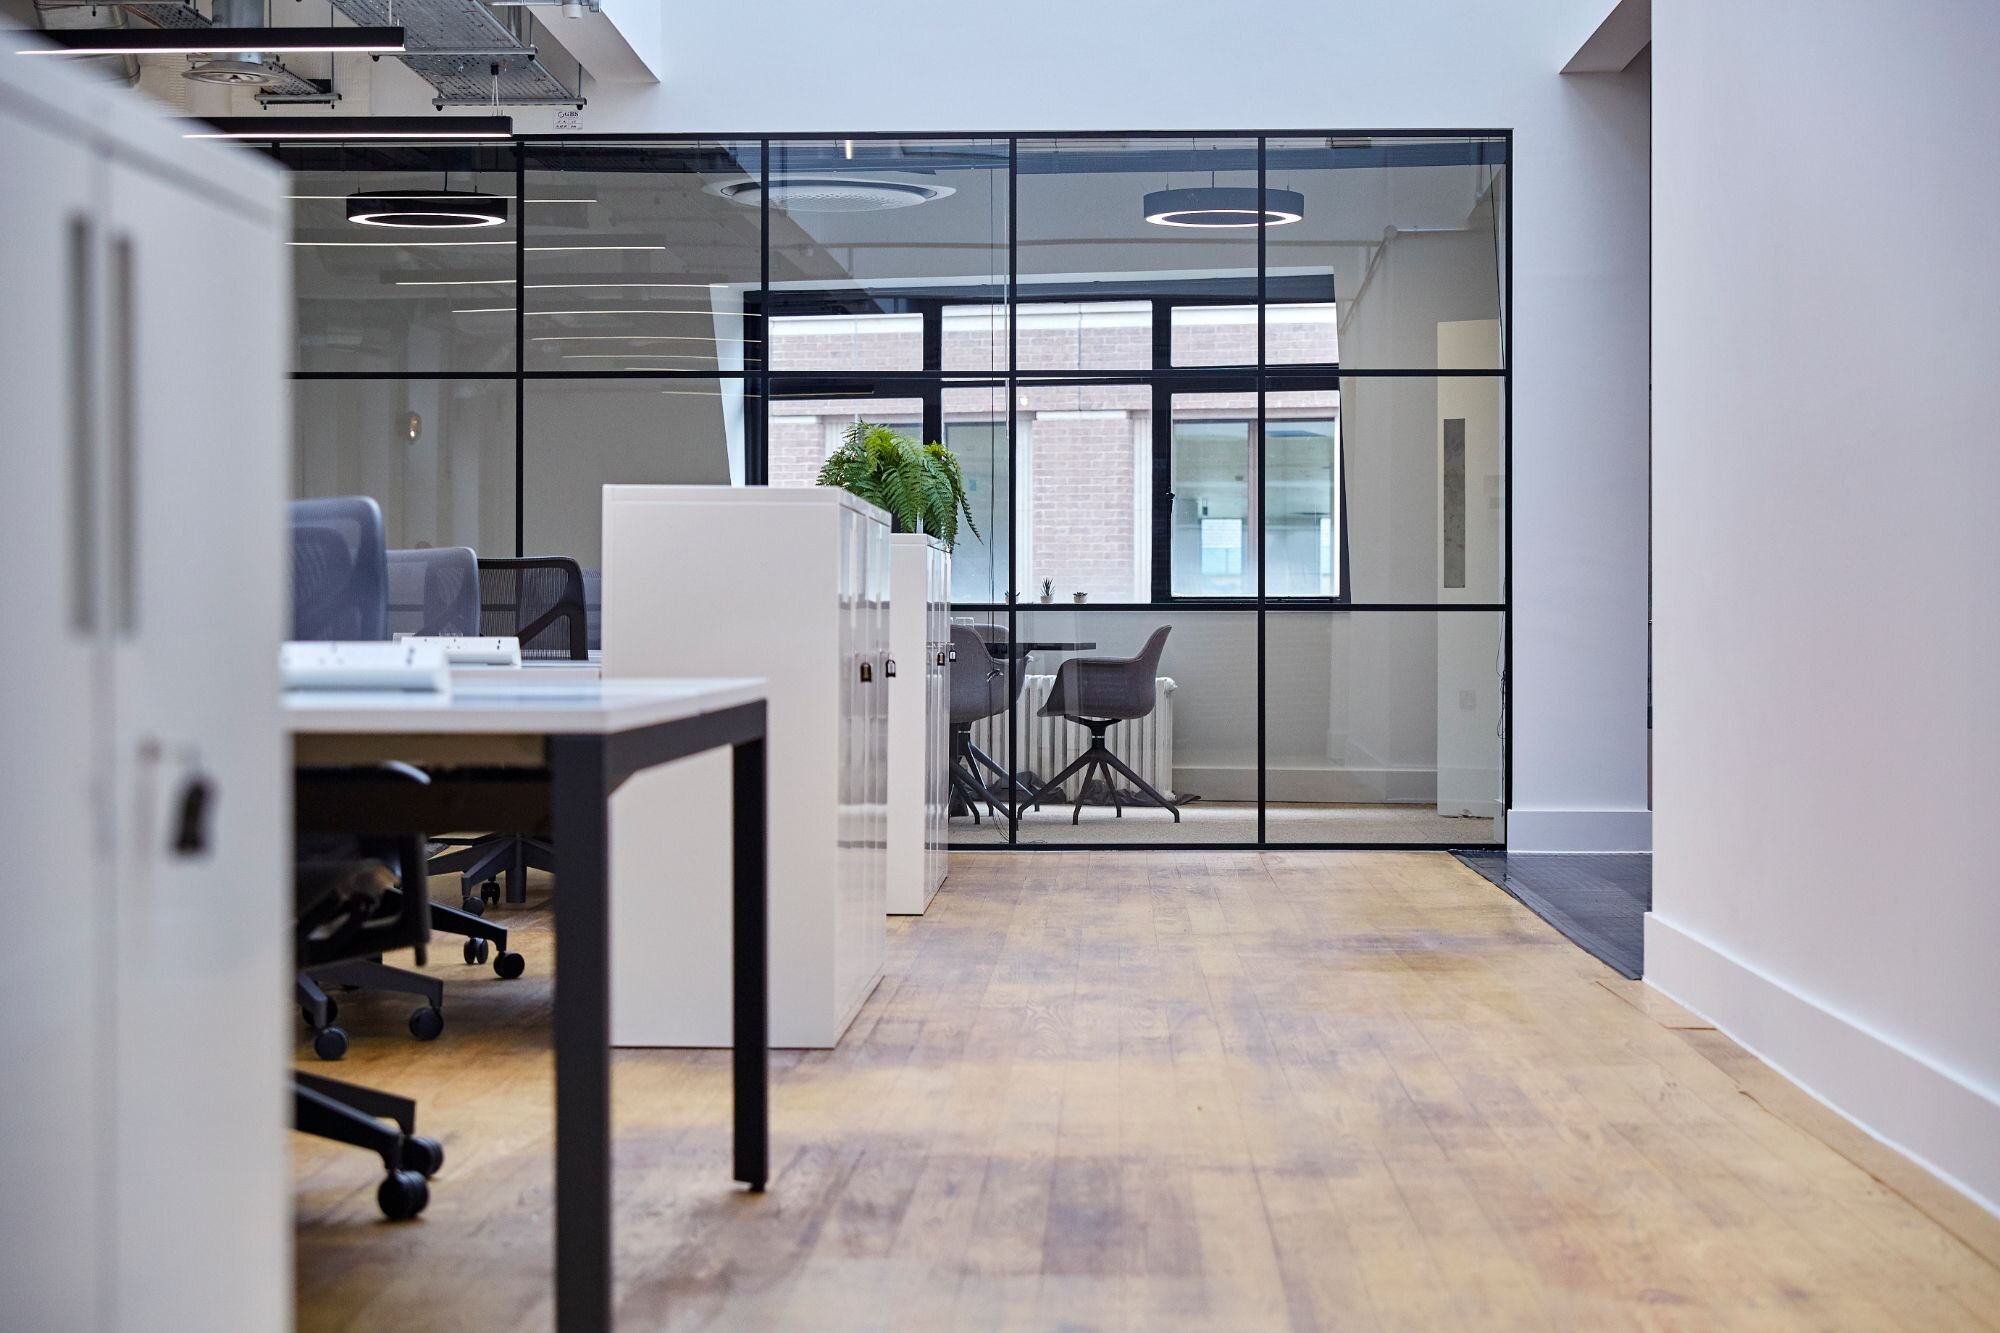 Office lighting for a high-end plug and play office space at 20 Dering Street, London.